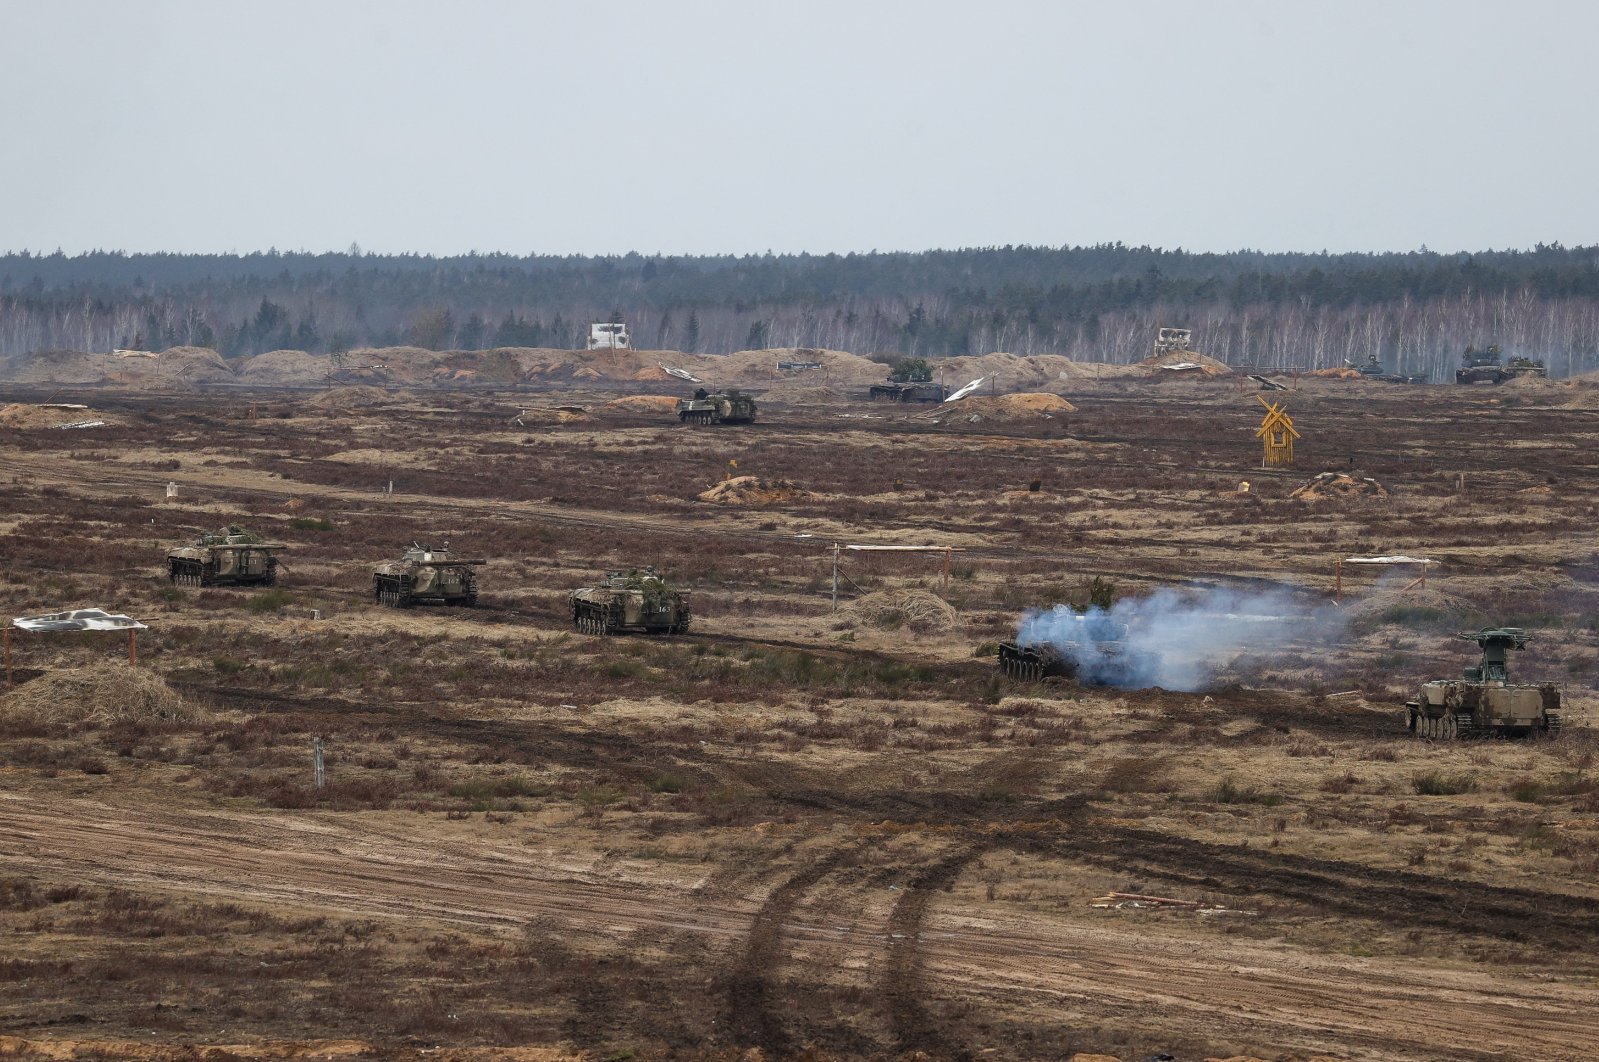 Troops take part in the joint military drills of the armed forces of Russia and Belarus at a firing range in the Brest Region, Belarus, Feb. 19, 2022. (Handout via REUTERS)